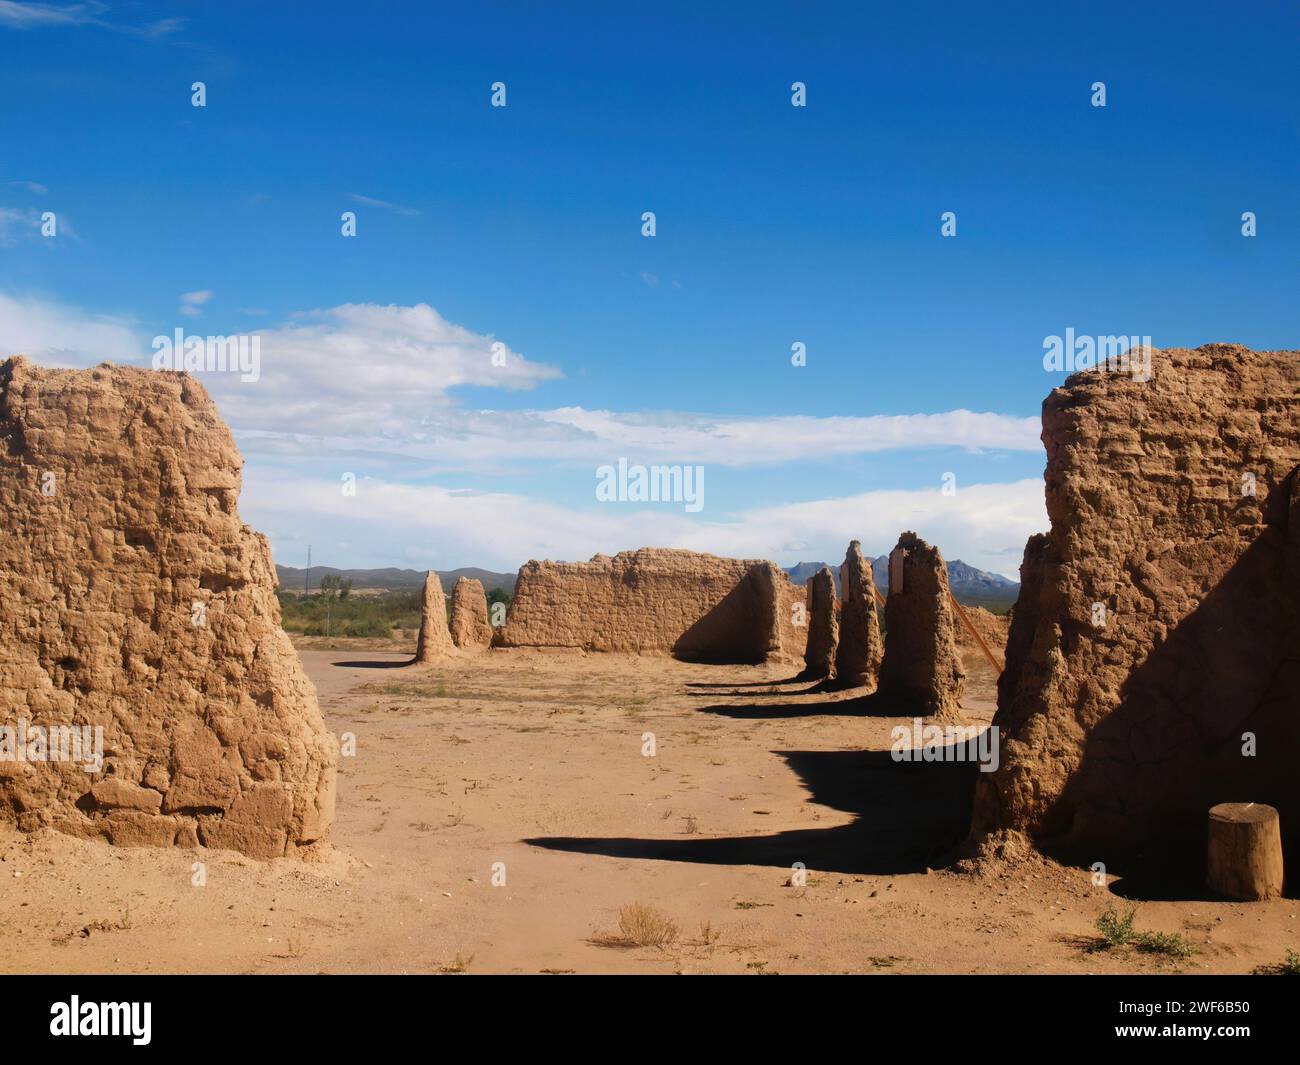 Fort Selden New Mexico adobe ruins Stock Photo